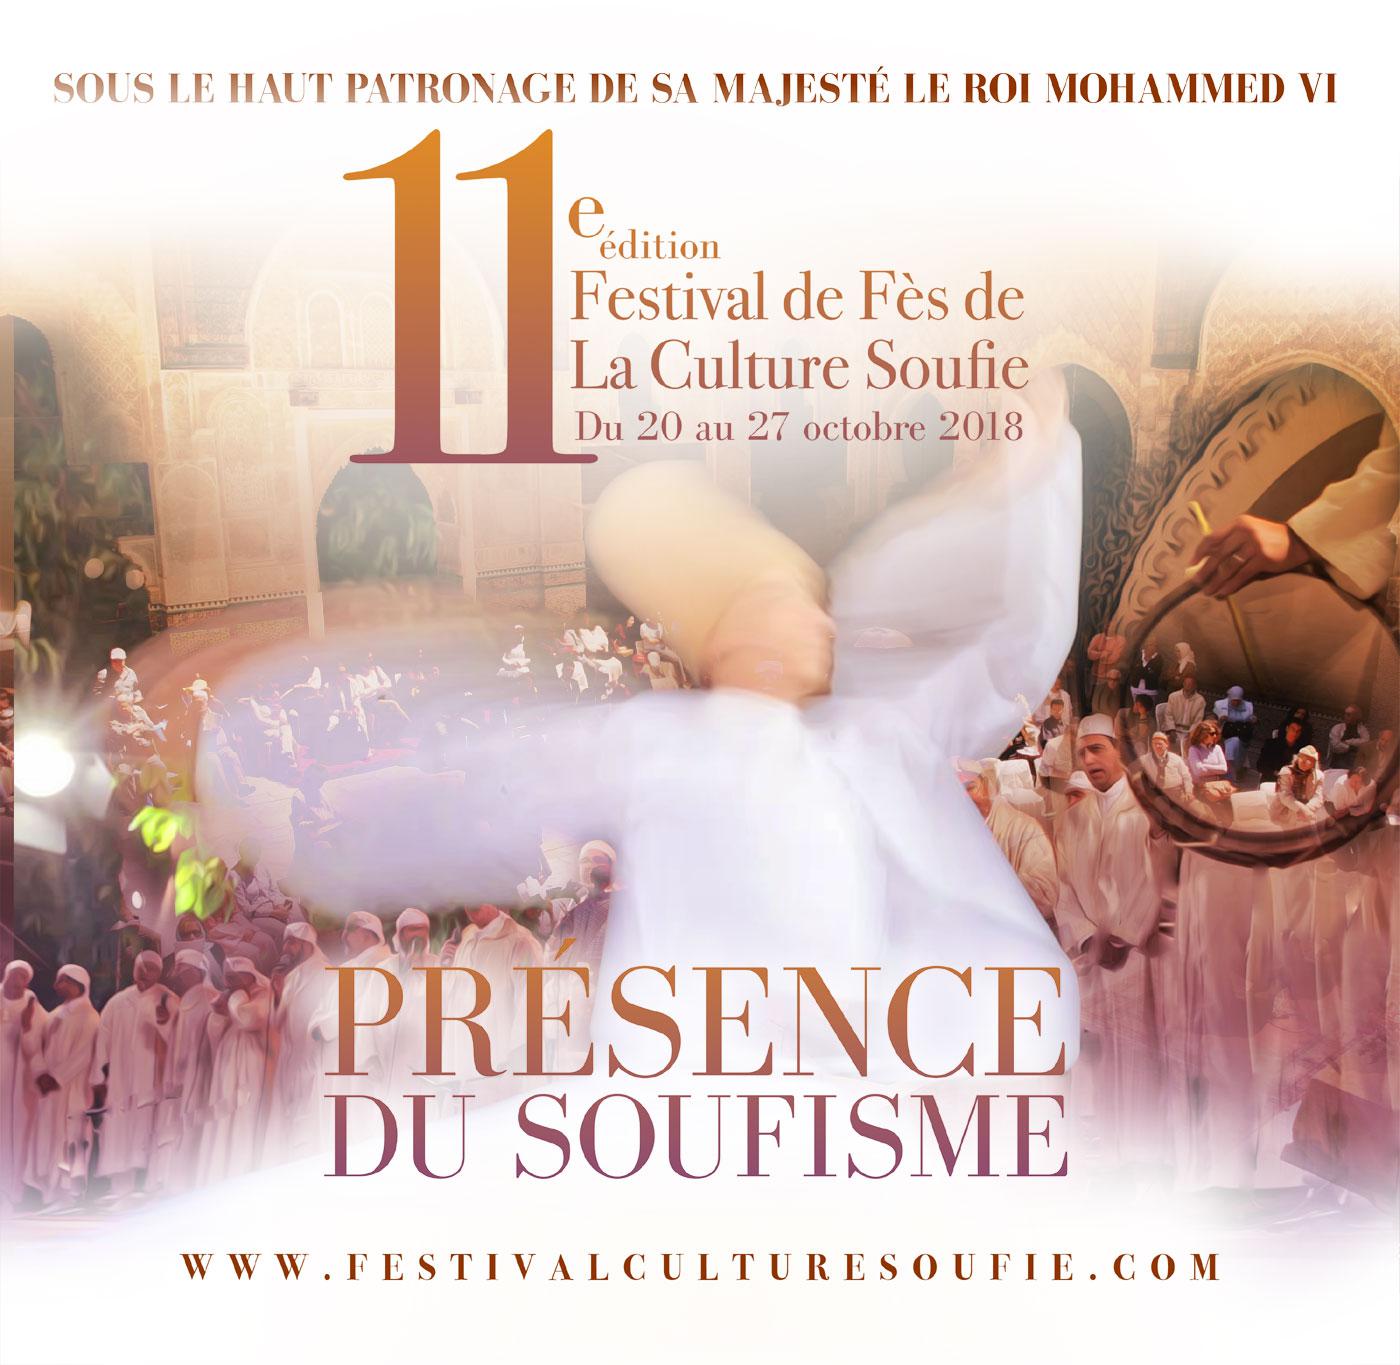 The 11th edition of the Festival of Sufi Culture